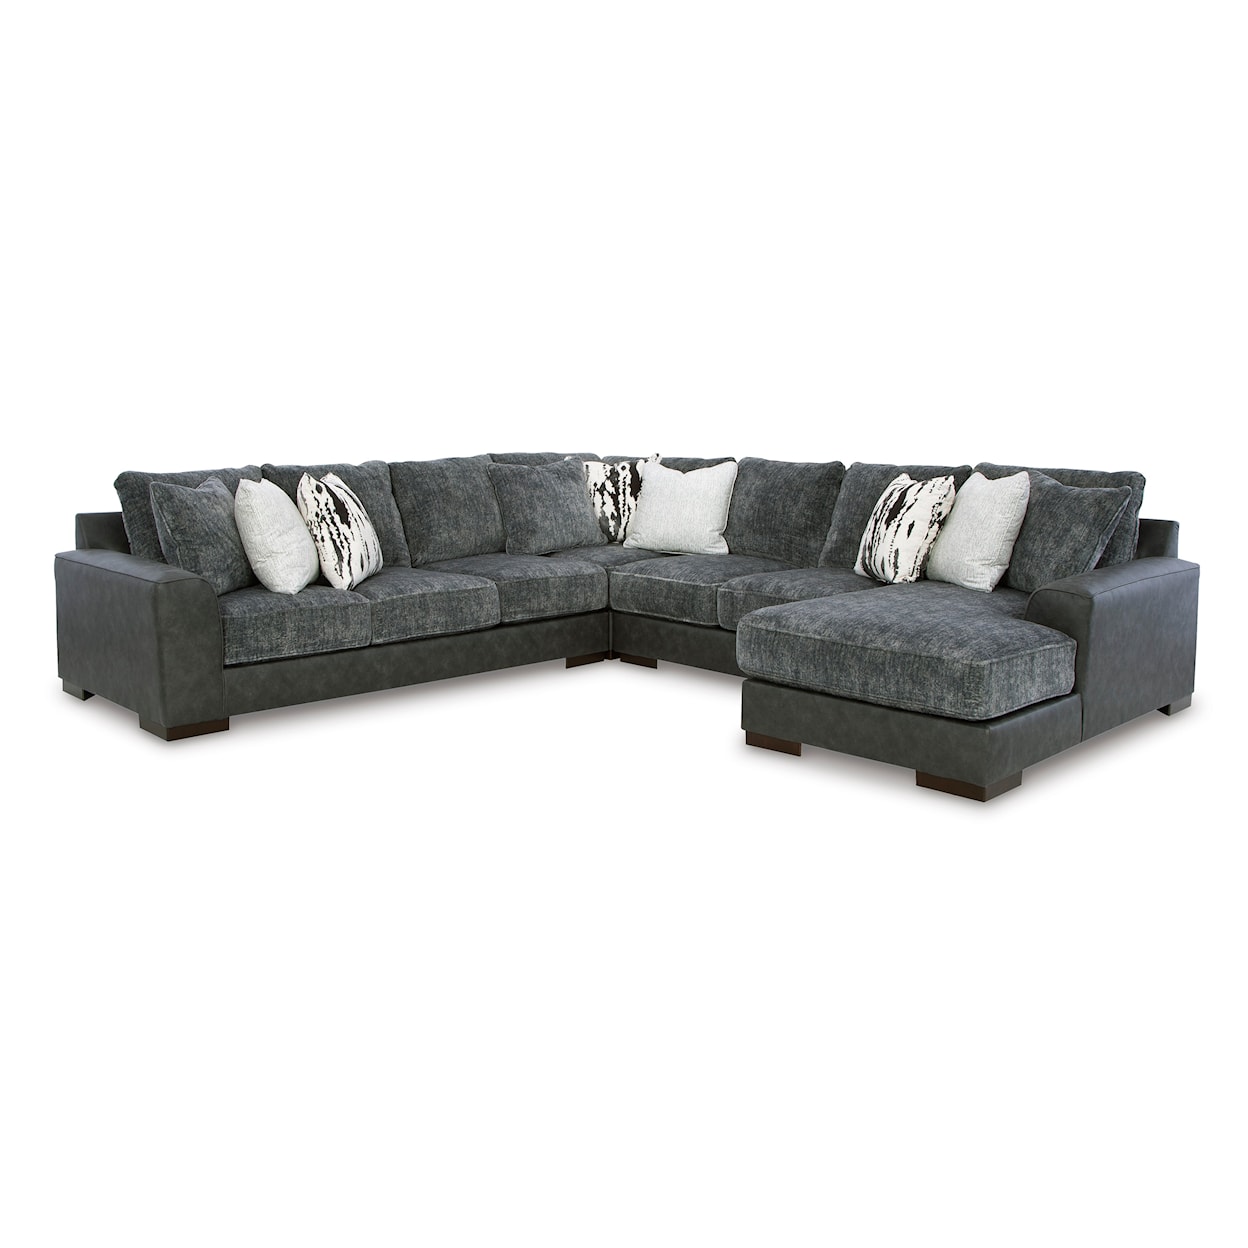 Ashley Signature Design Larkstone Sectional Sofa with Chaise